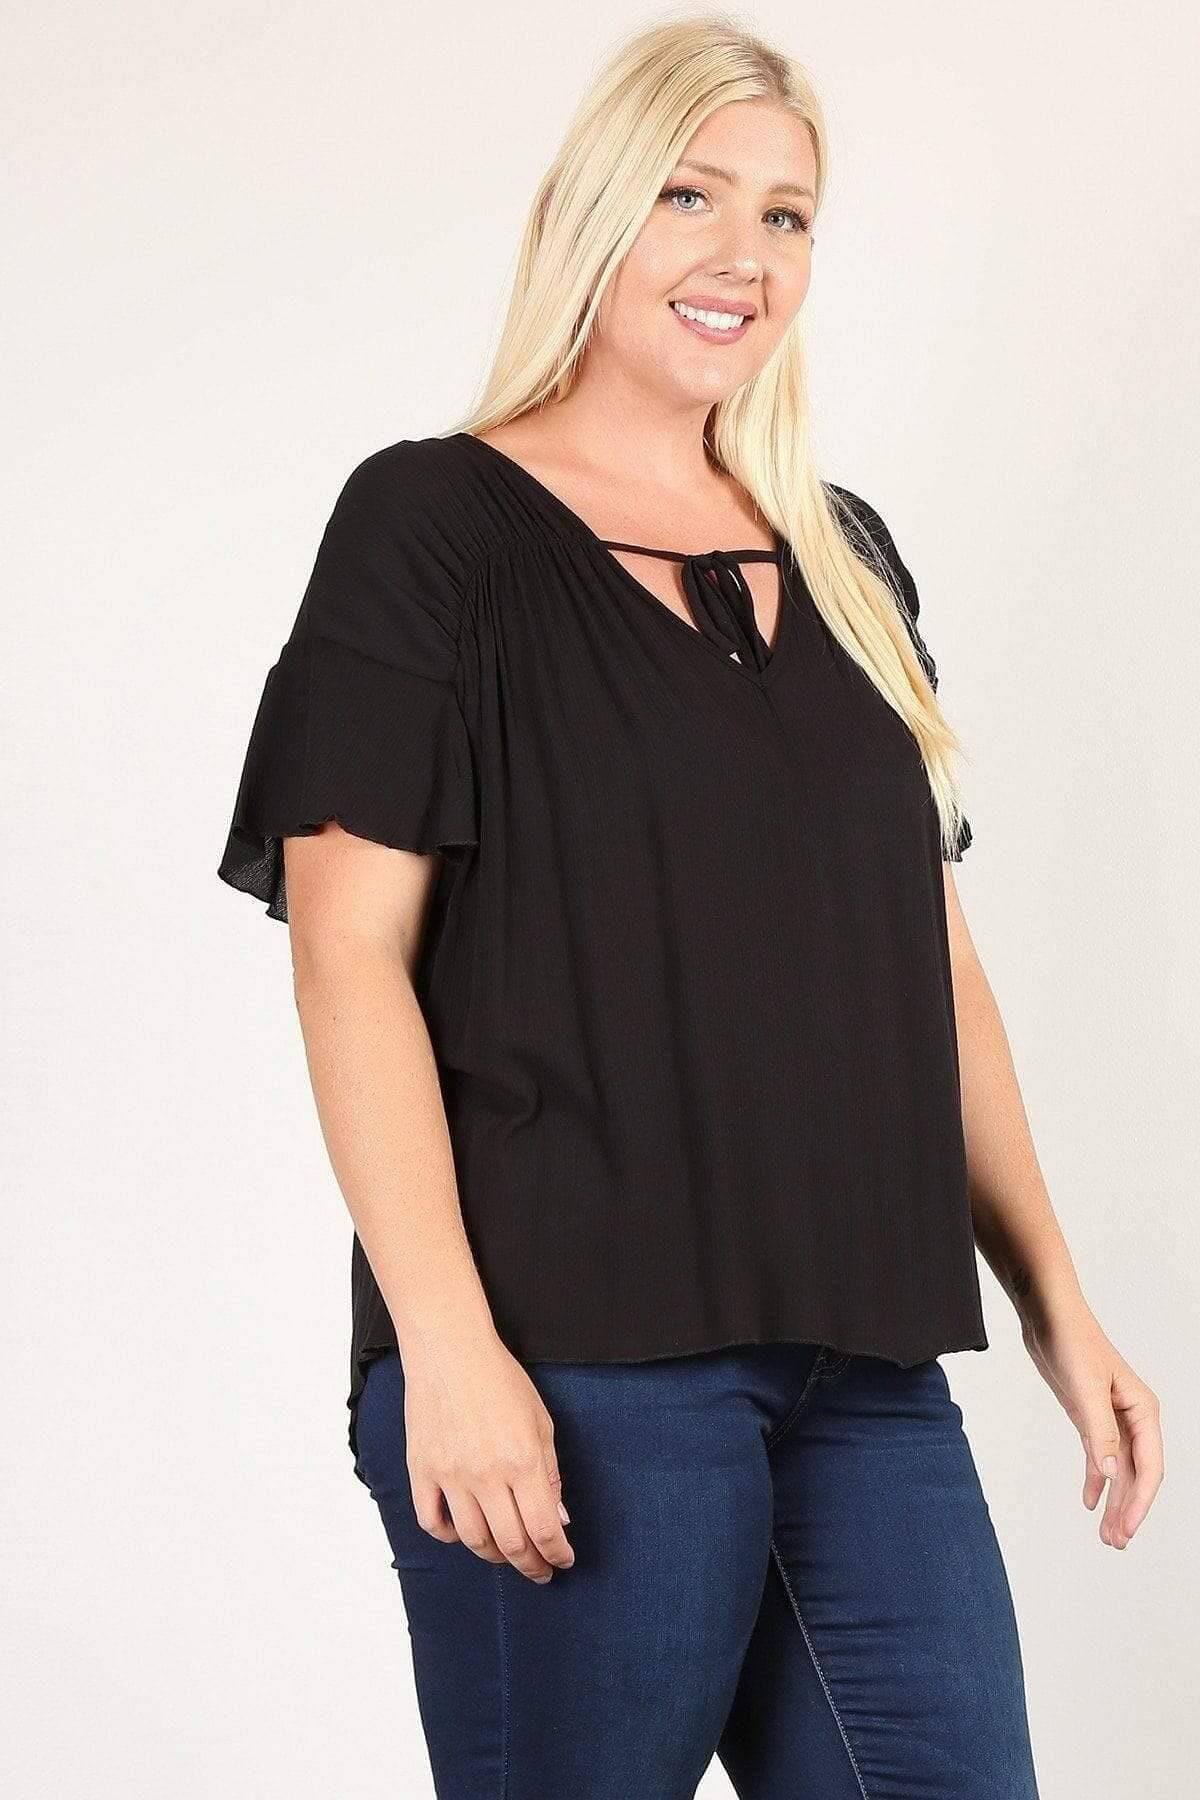 Black 3/4 Ruched Sleeve Plus Top - Shopping Therapy 3XL Top